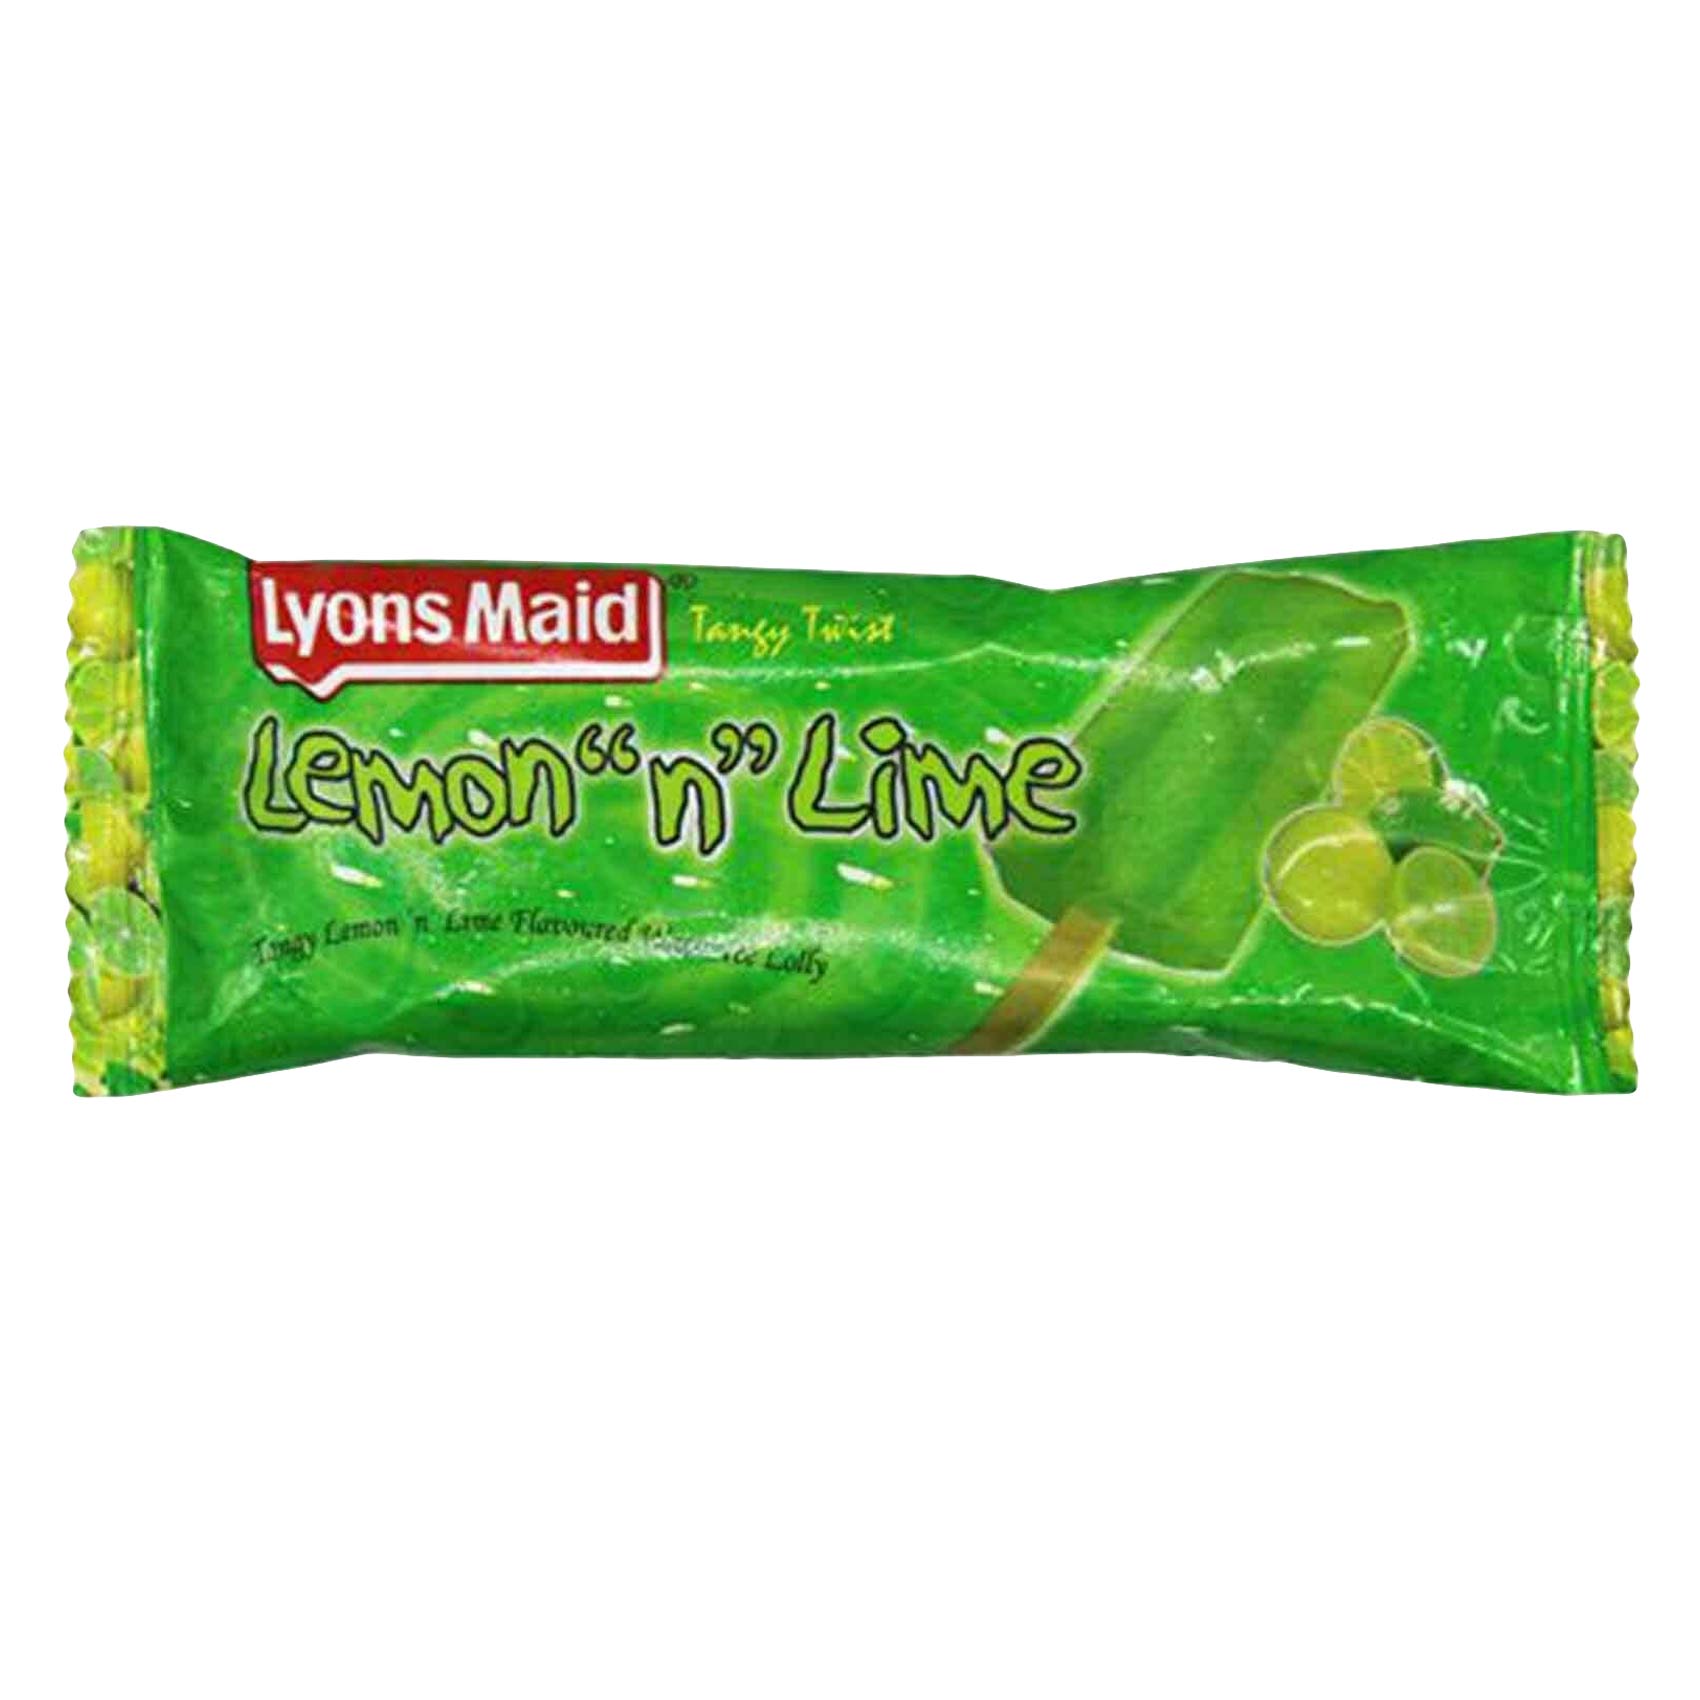 Lyons Maid Lemon And Lime Lolly Ice Cream Stick 55ml